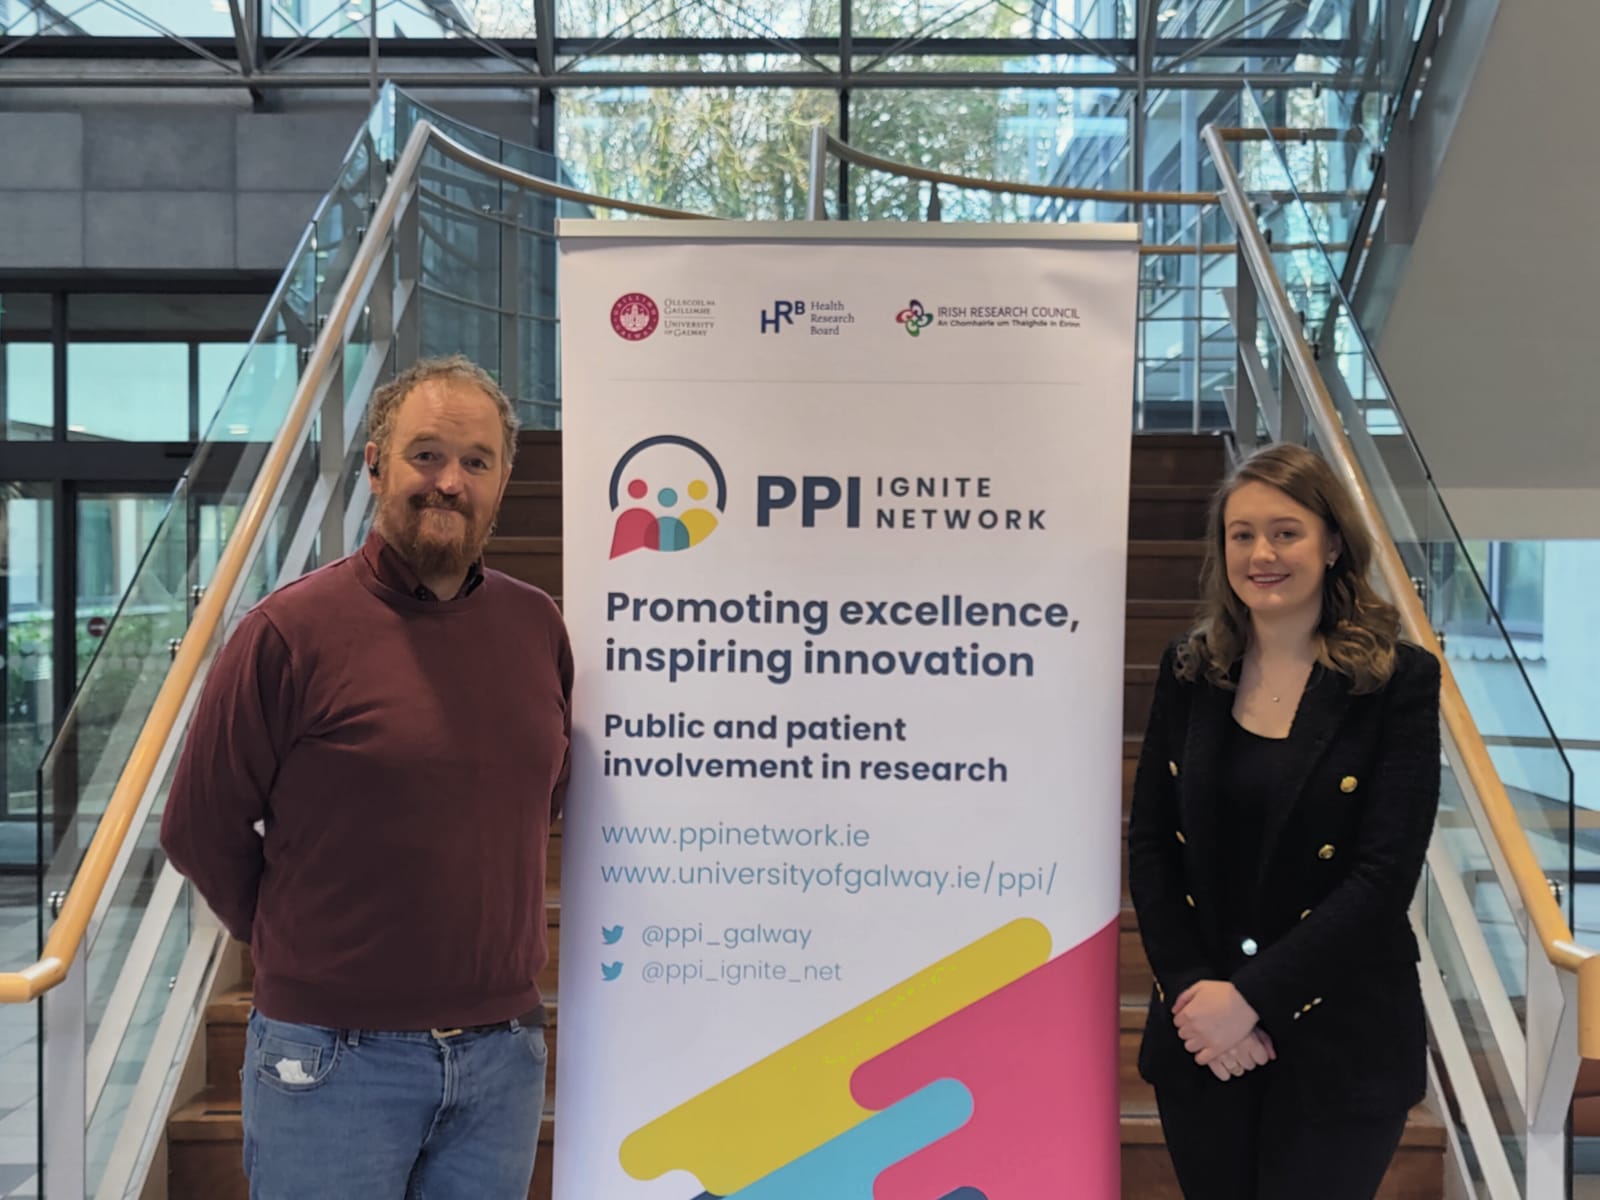 Brendan Dolan Postdoctoral researcher in the PPI Ignite Network @ University of Galway standing with awardee Saoirse Lally